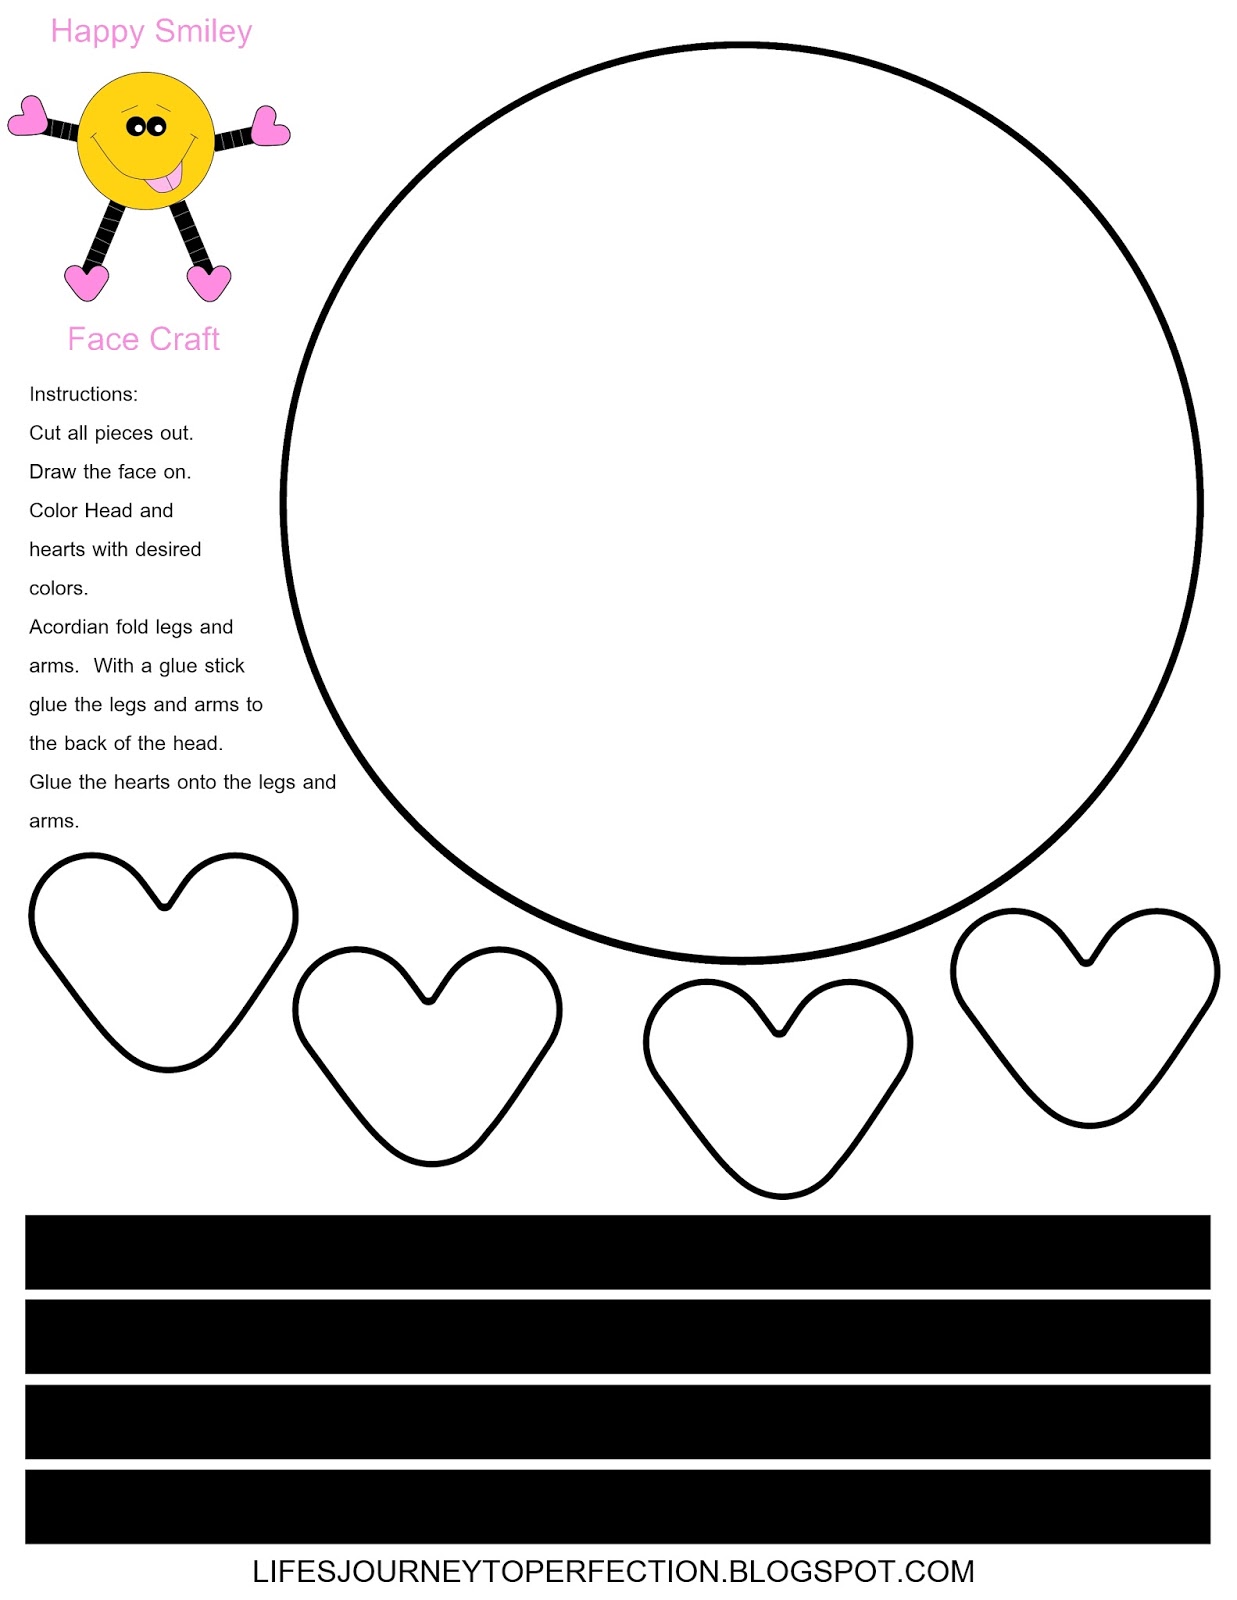 Life's Journey To Perfection: Smiley Face Valentine's Day Craft Printable